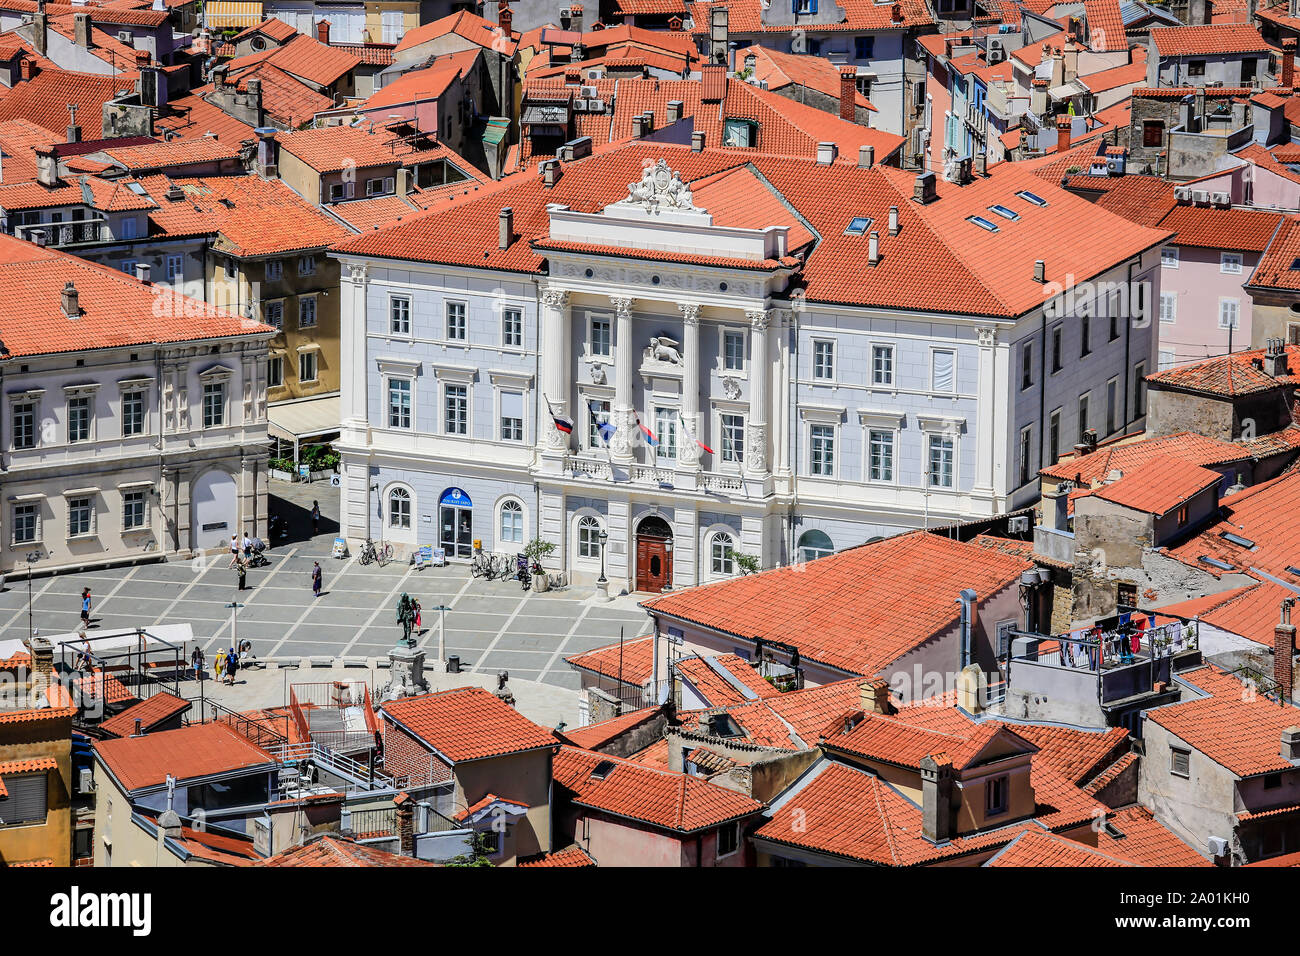 Piran, Istria, Slovenia - city view, view over Tartini Square and the roofs of the Mediterranean port. Piran, Istrien, Slowenien - Stadtuebersicht, Bl Stock Photo